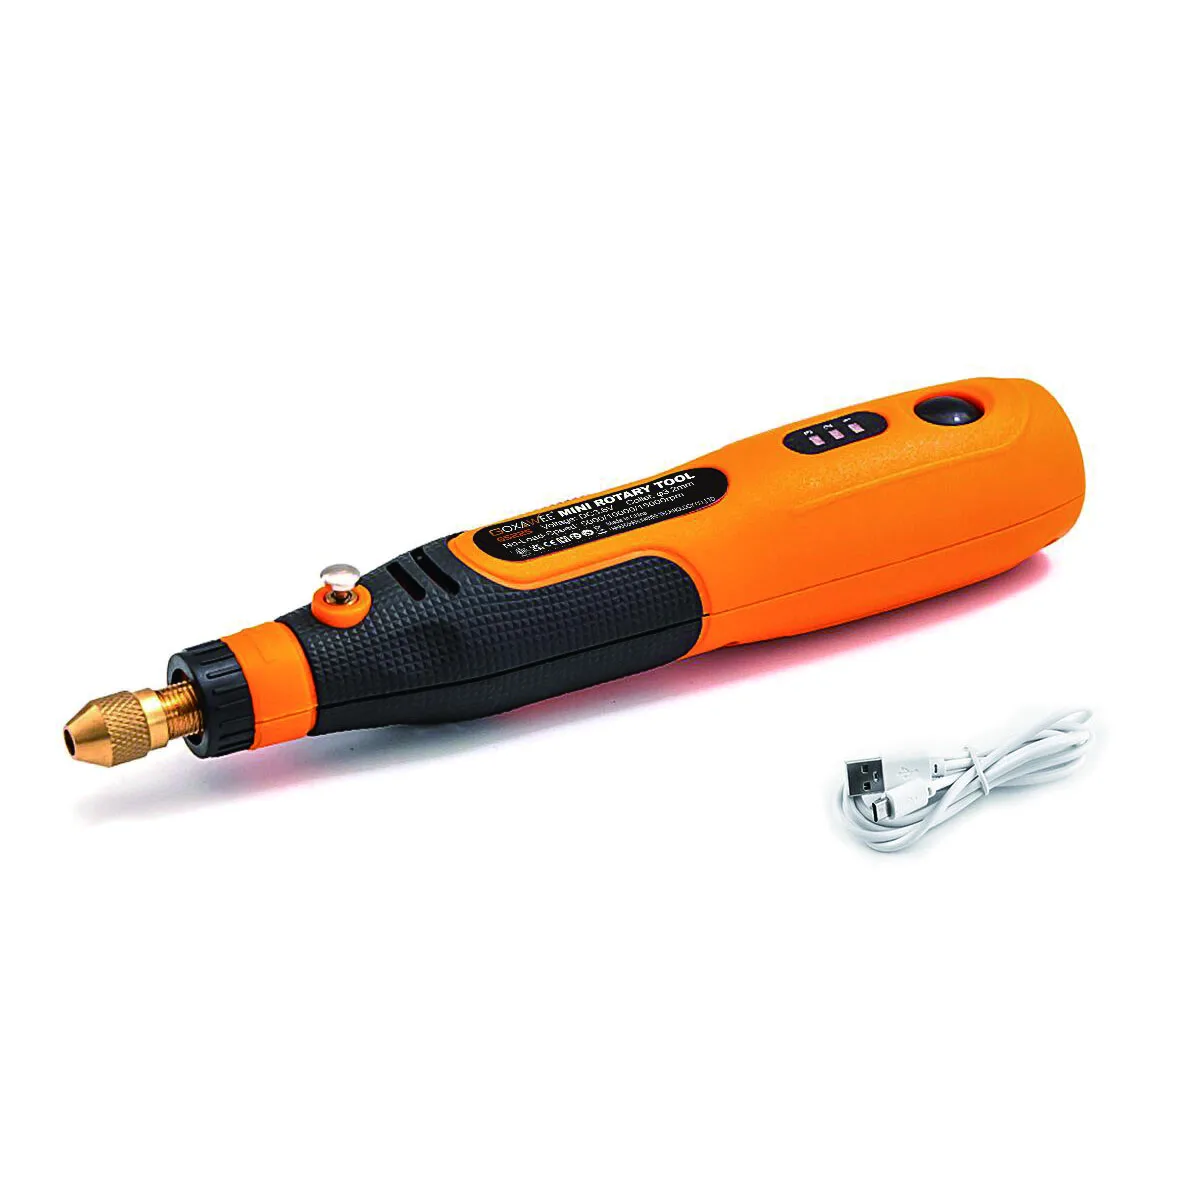 GOXAWEE Engraver Electric Cordless Mini Drill Grinder For Accessories US... - $372.37